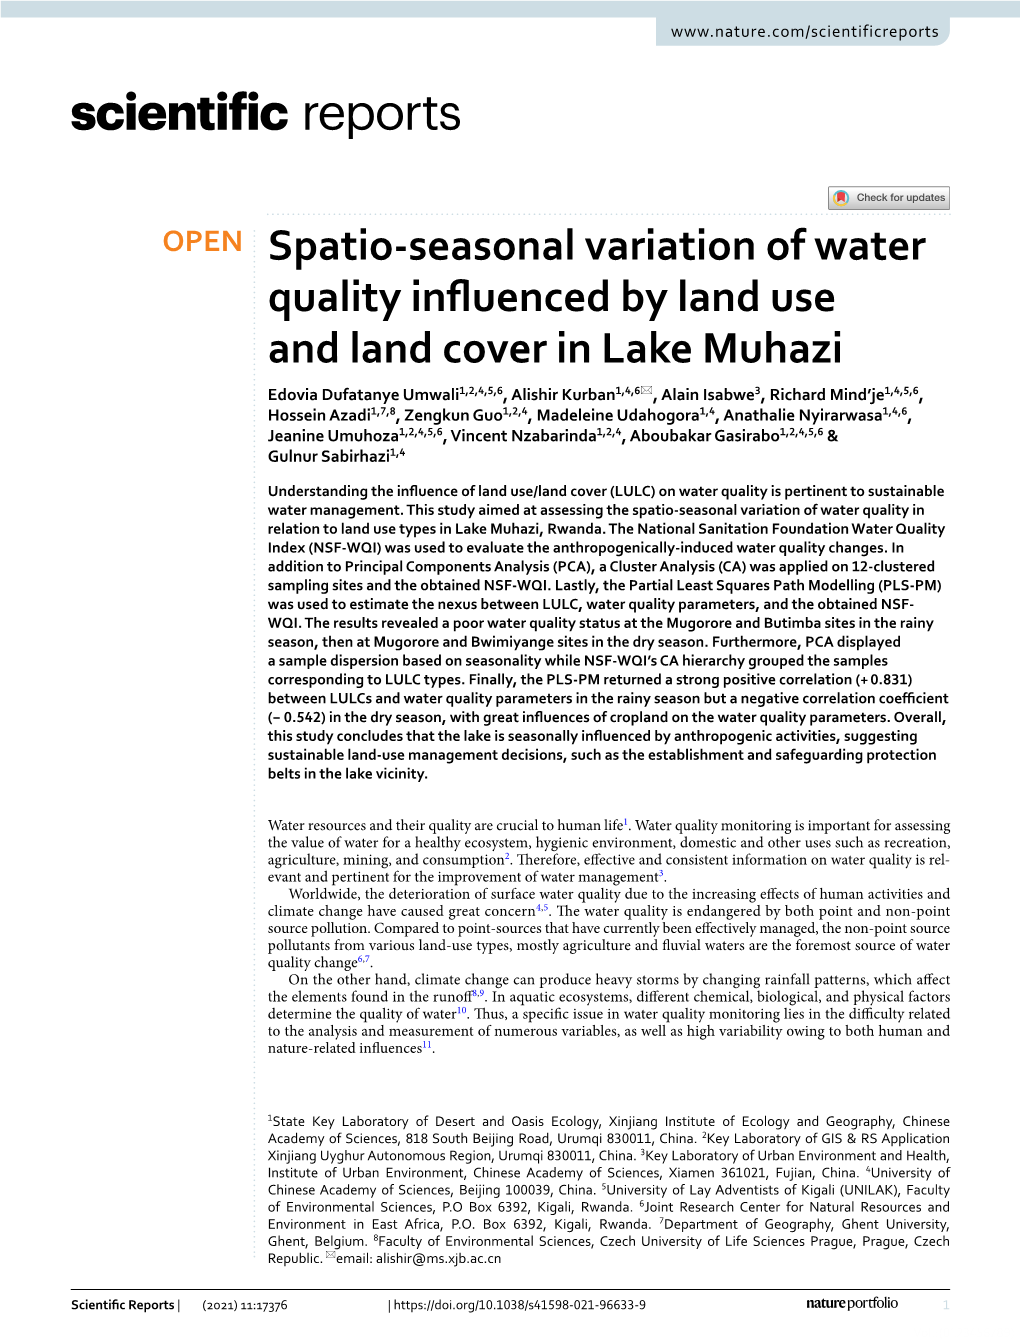 Spatio-Seasonal Variation of Water Quality Influenced by Land Use And